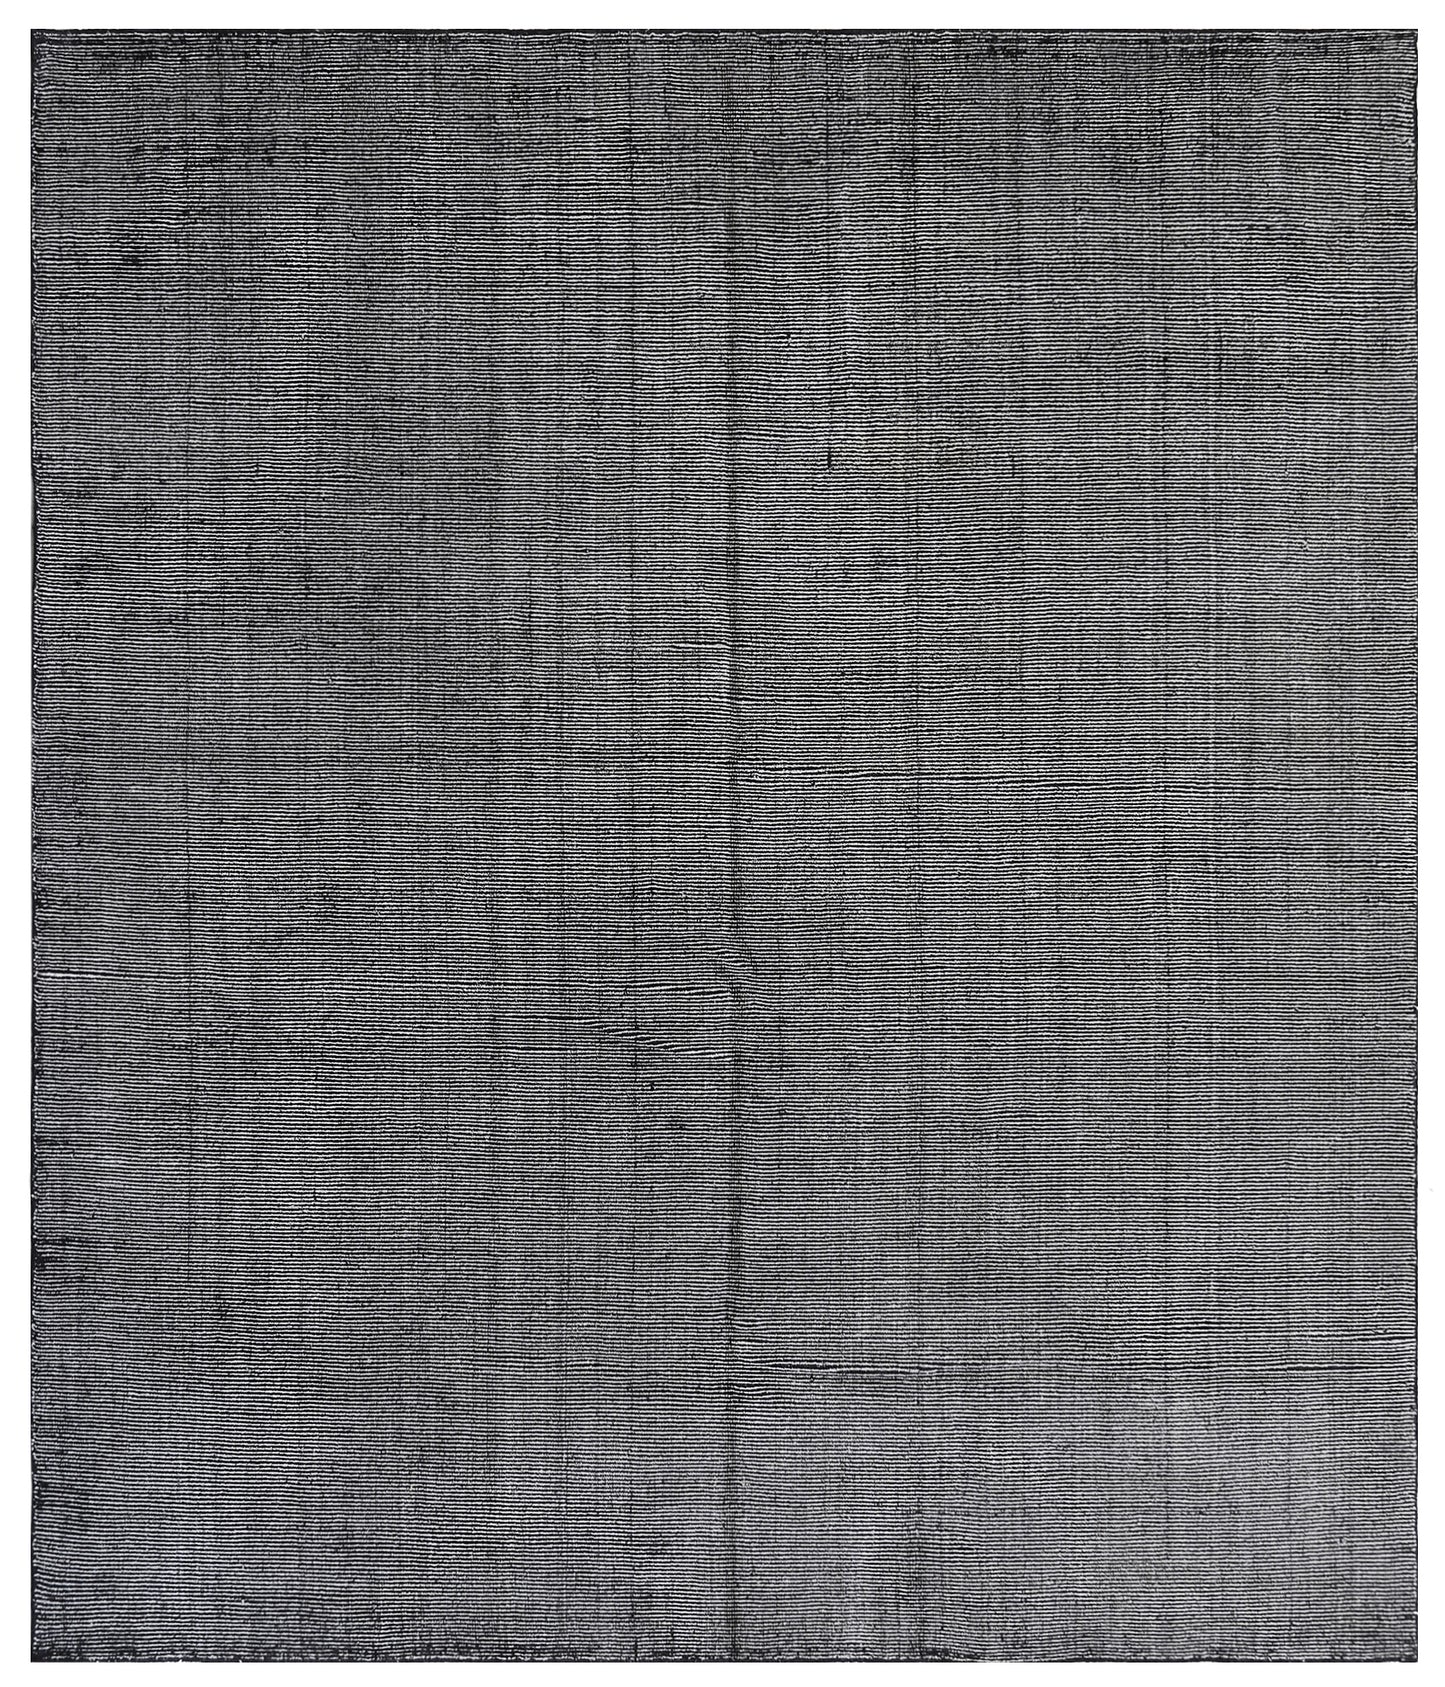 9'x12' Black And White Contemporary Linear Design Indian Handloom Rug